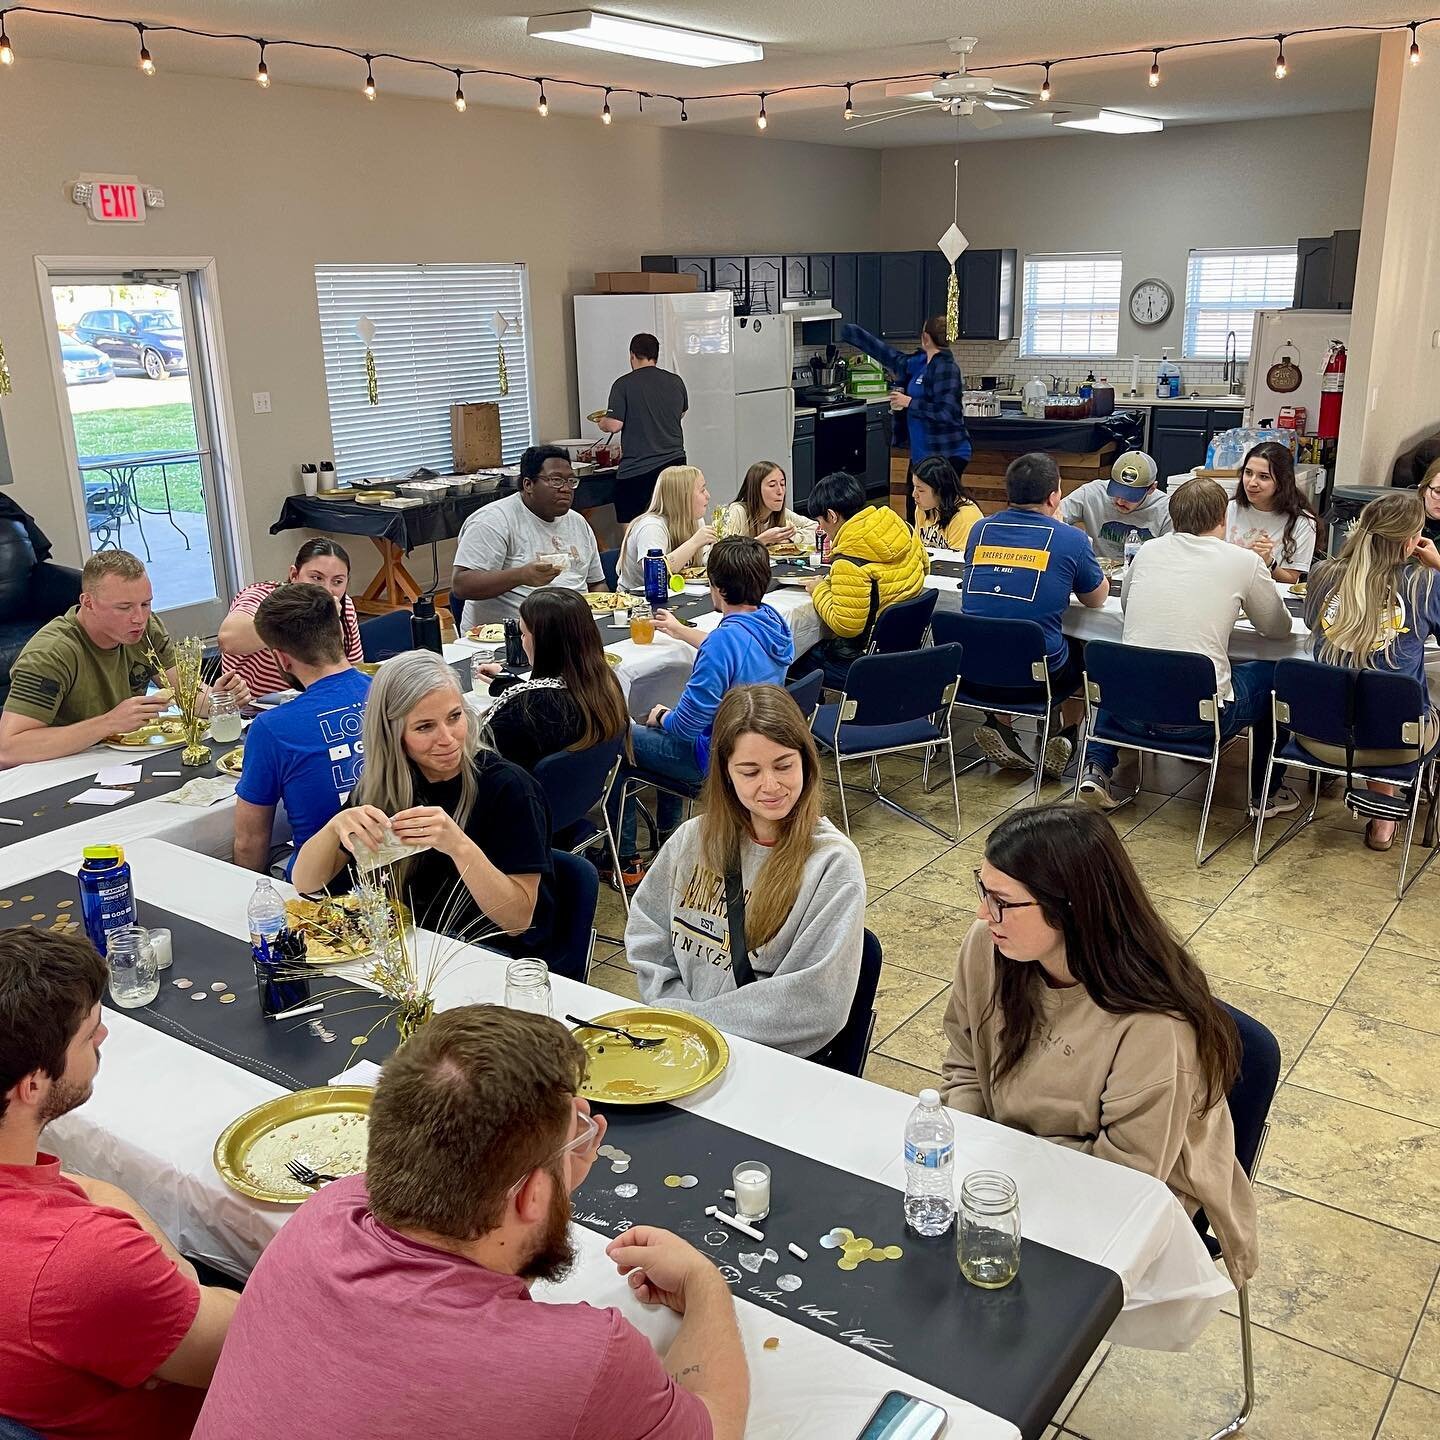 SENIOR NIGHT
-
We had a blast last night! Congrats to our seniors. Finish well! Stoked for the 10 of you and for your journey forward. 
-
#murraystate #campusministry #lovegodlovepeople